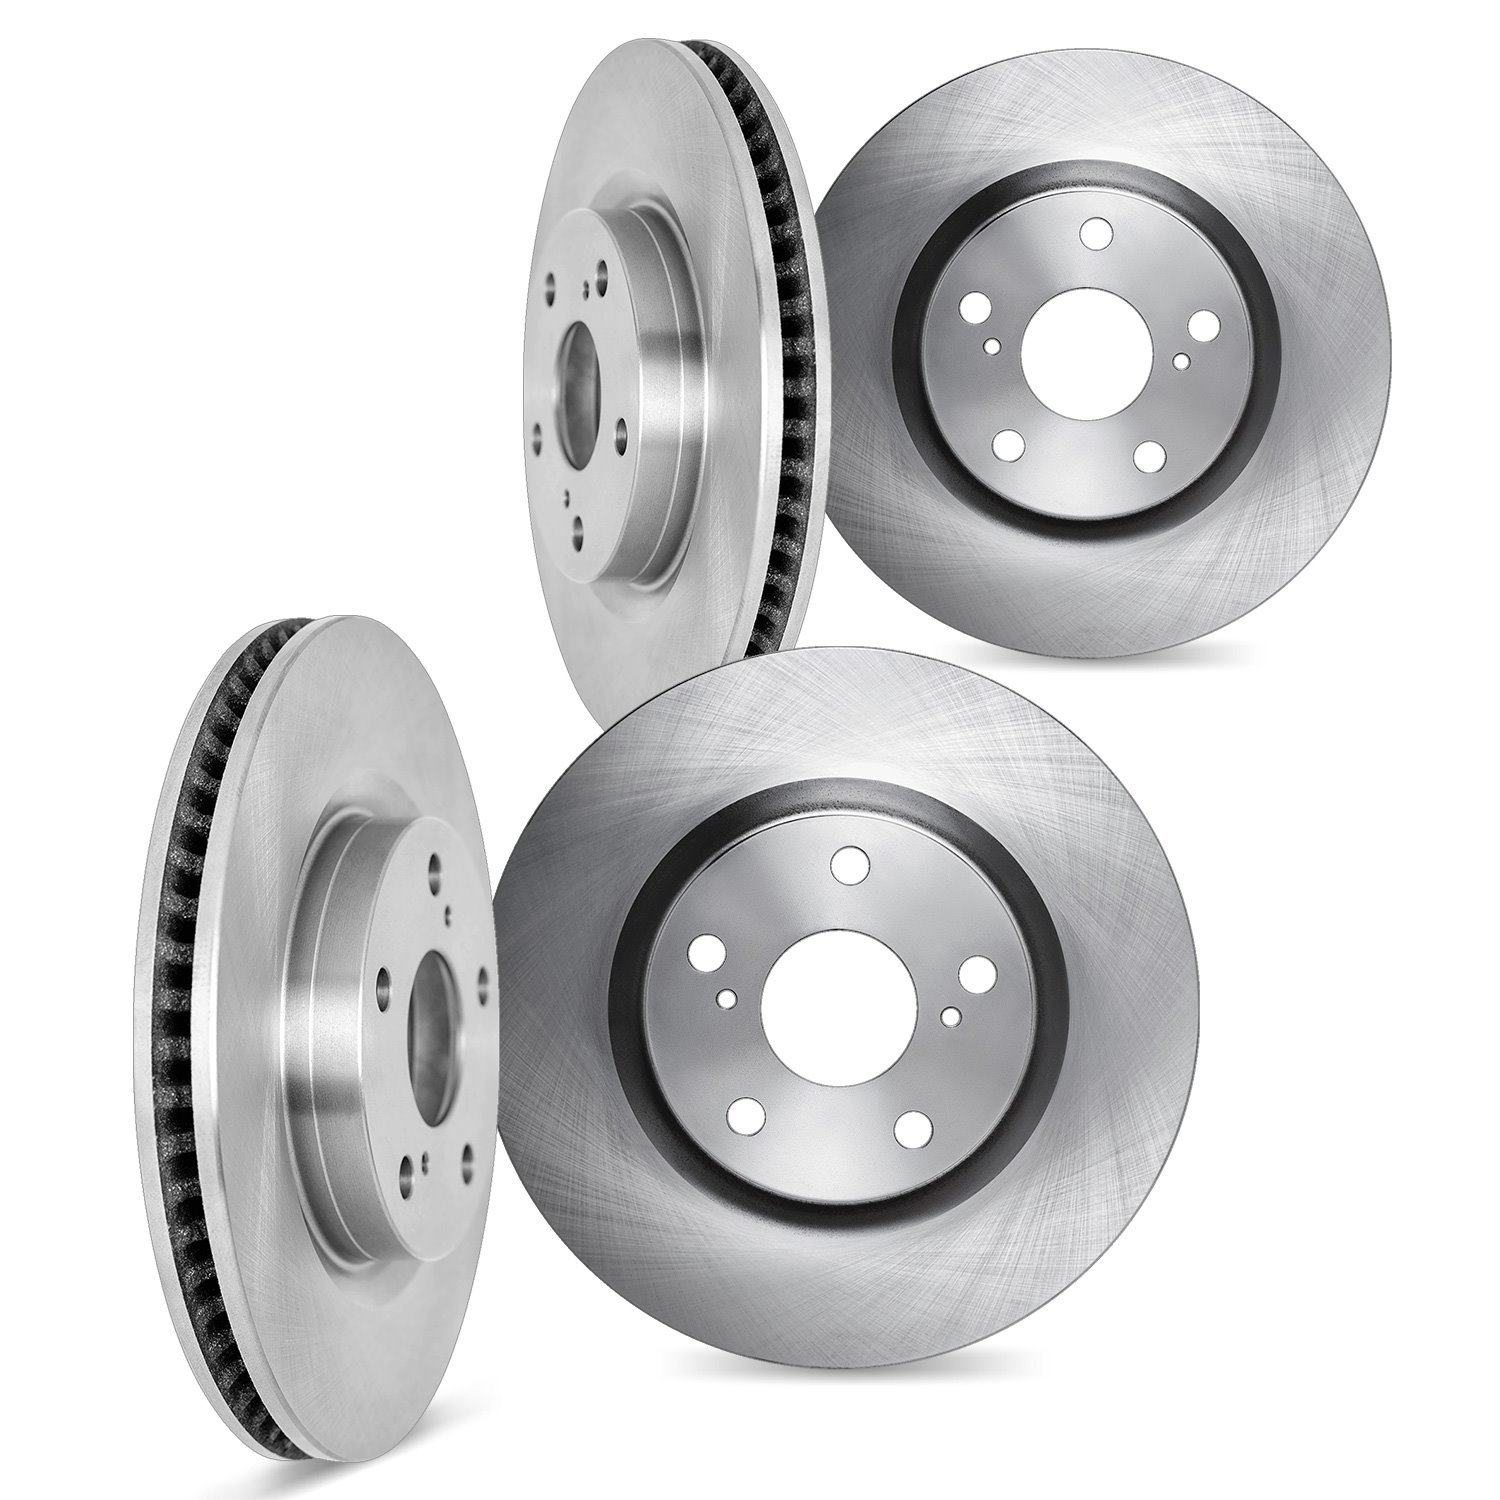 6004-54343 Brake Rotors, Fits Select Ford/Lincoln/Mercury/Mazda, Position: Front and Rear